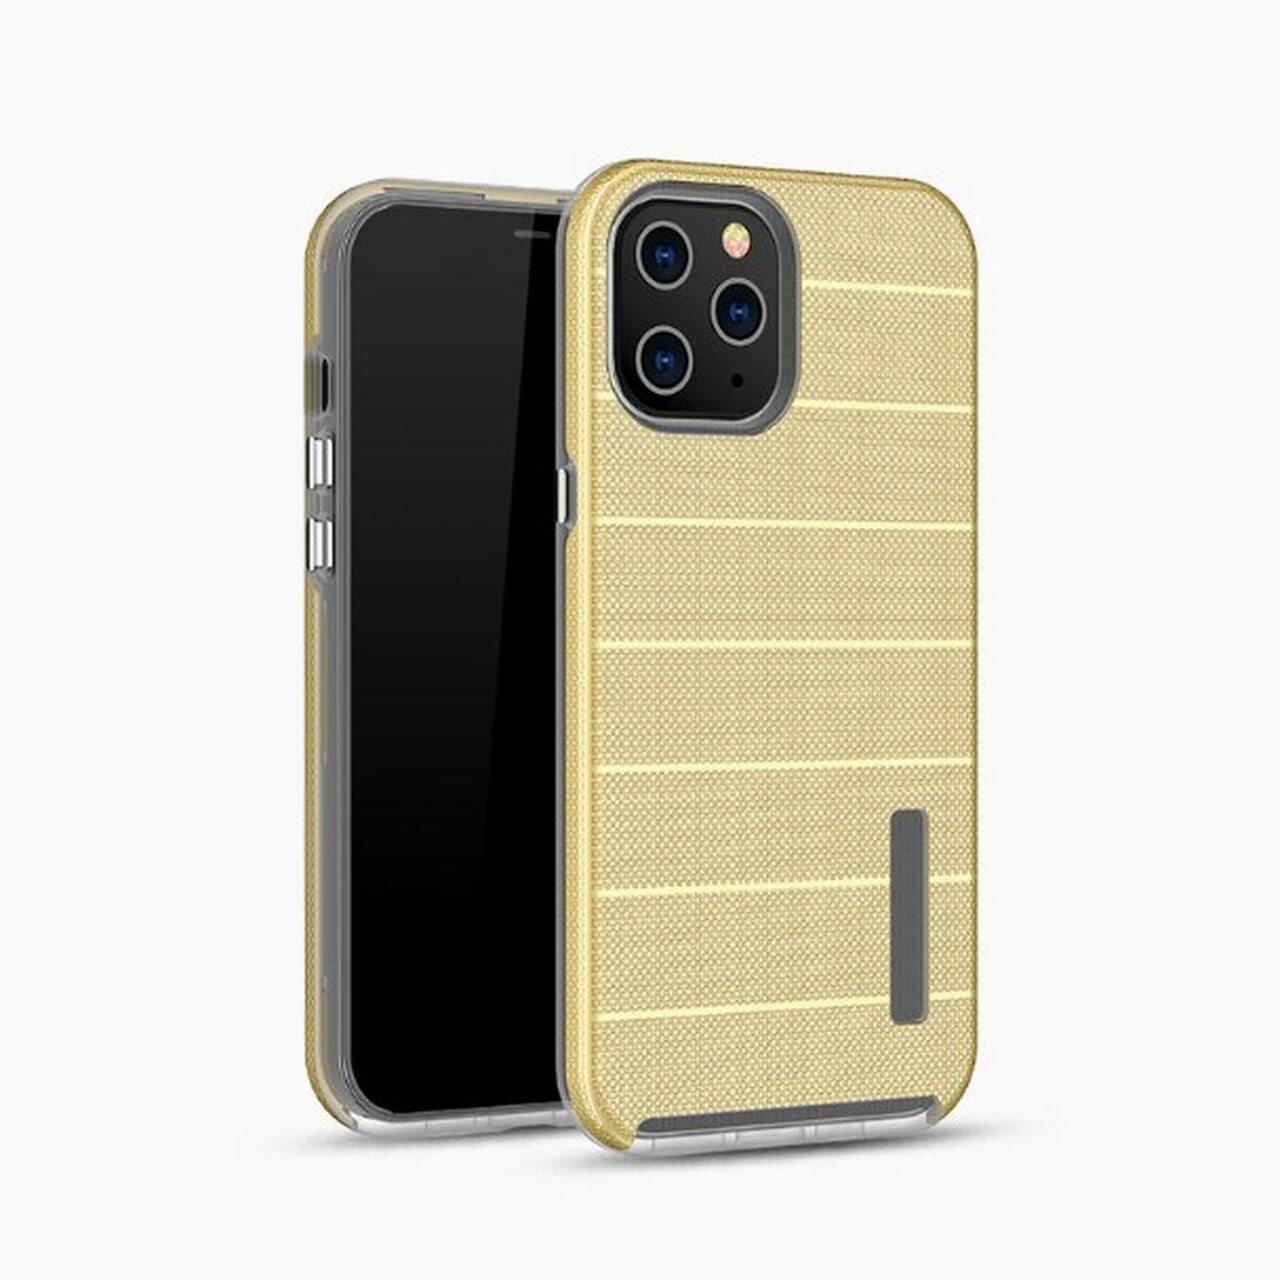 Caseology Hard Shell Fashion Case for iPhone 11 Pro